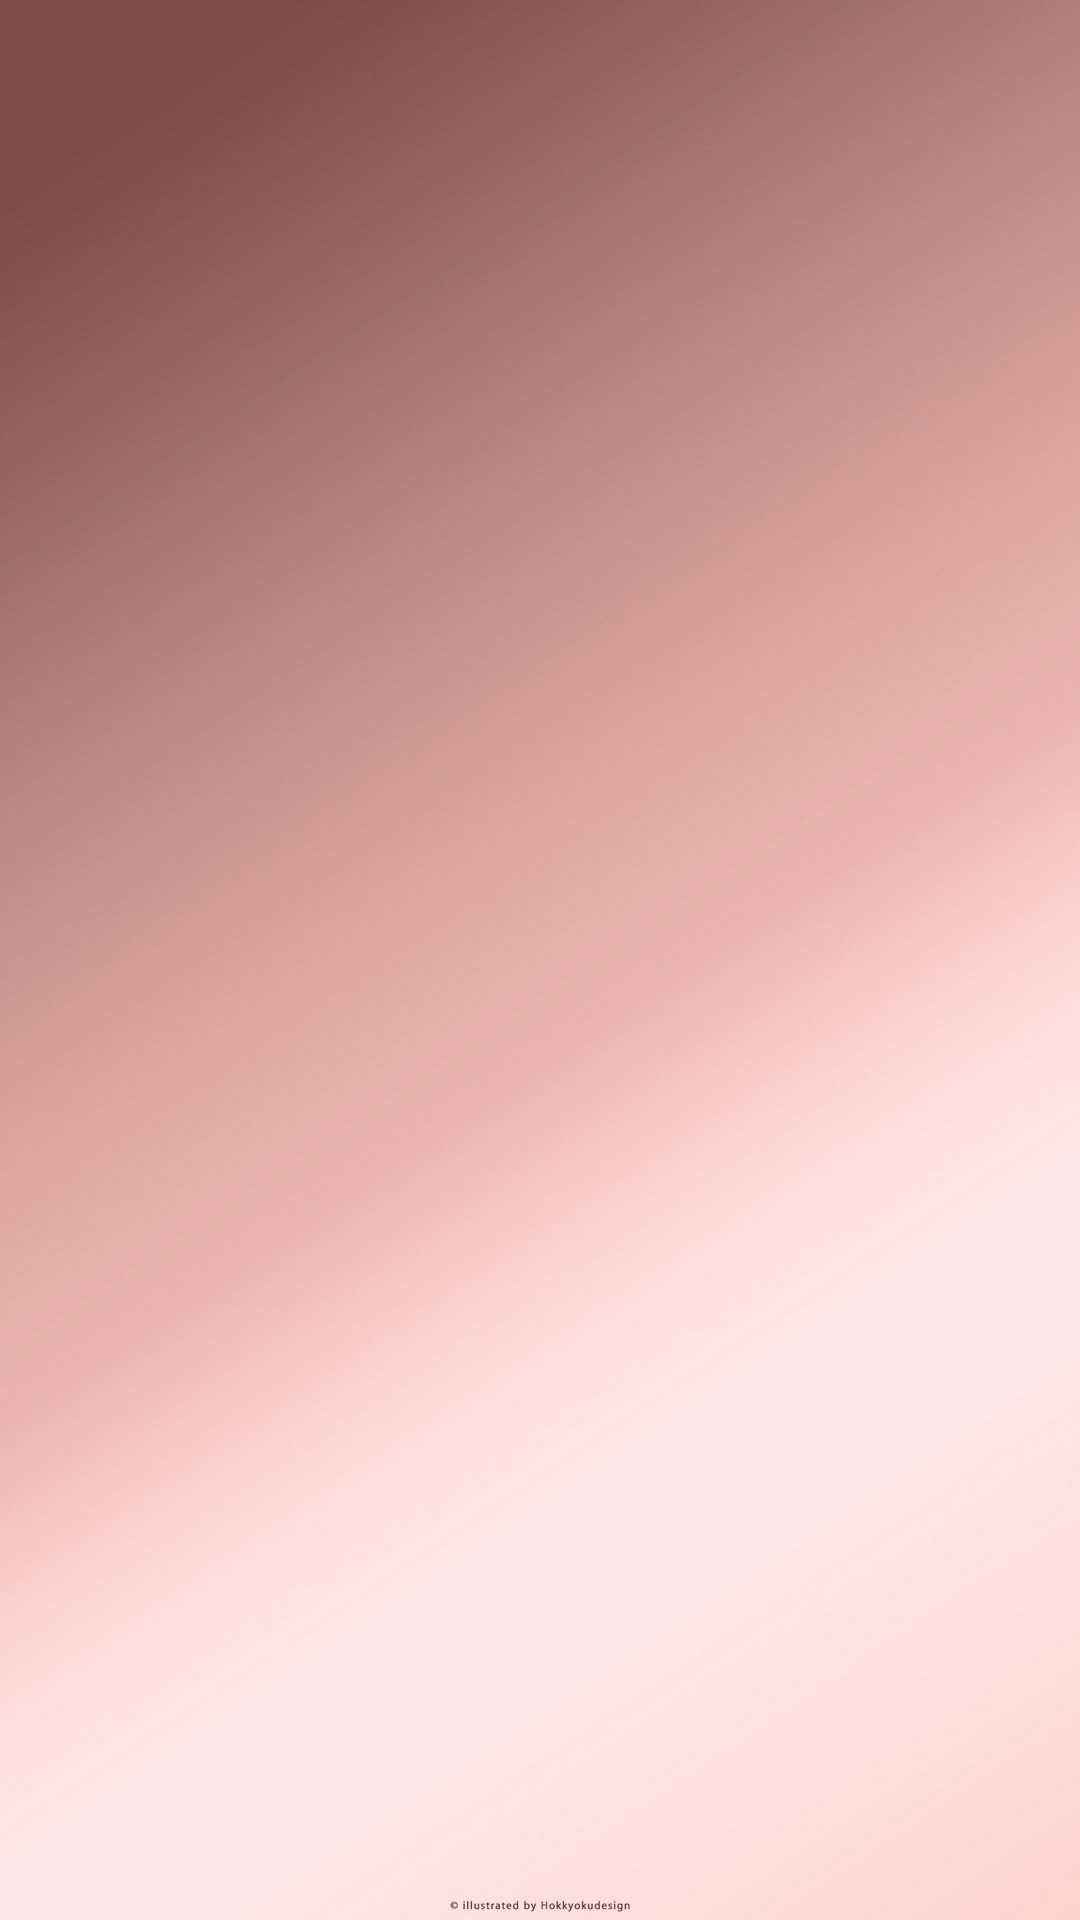 Rose Gold Wallpaper For Android with HD resolution 1080x1920